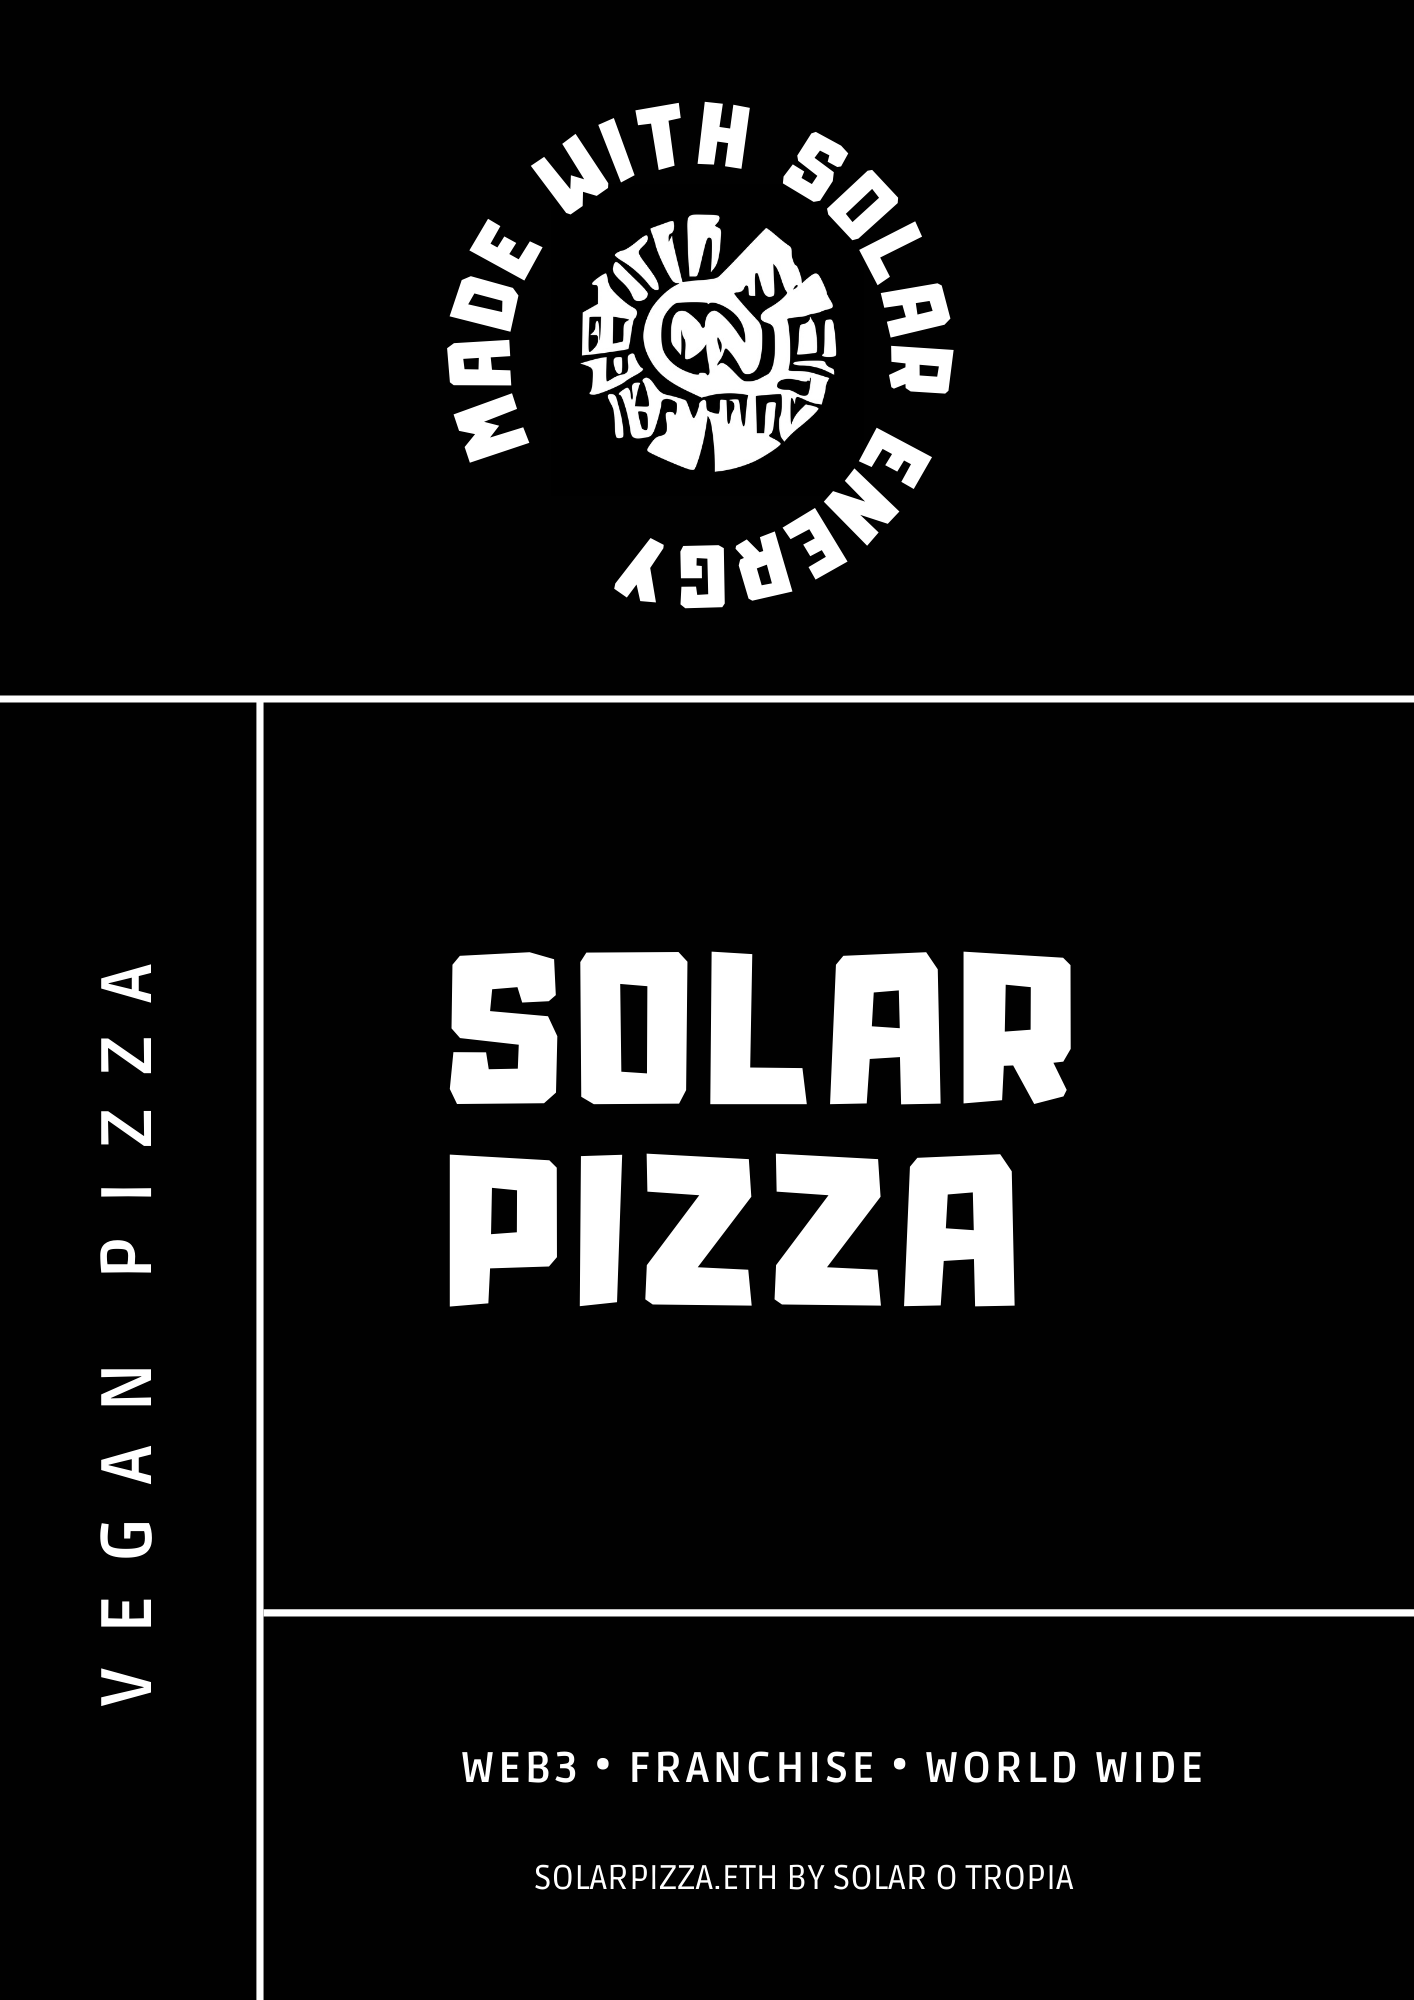 Poster of Solar Pizza, the first decentralized autonomous franchise in Web3